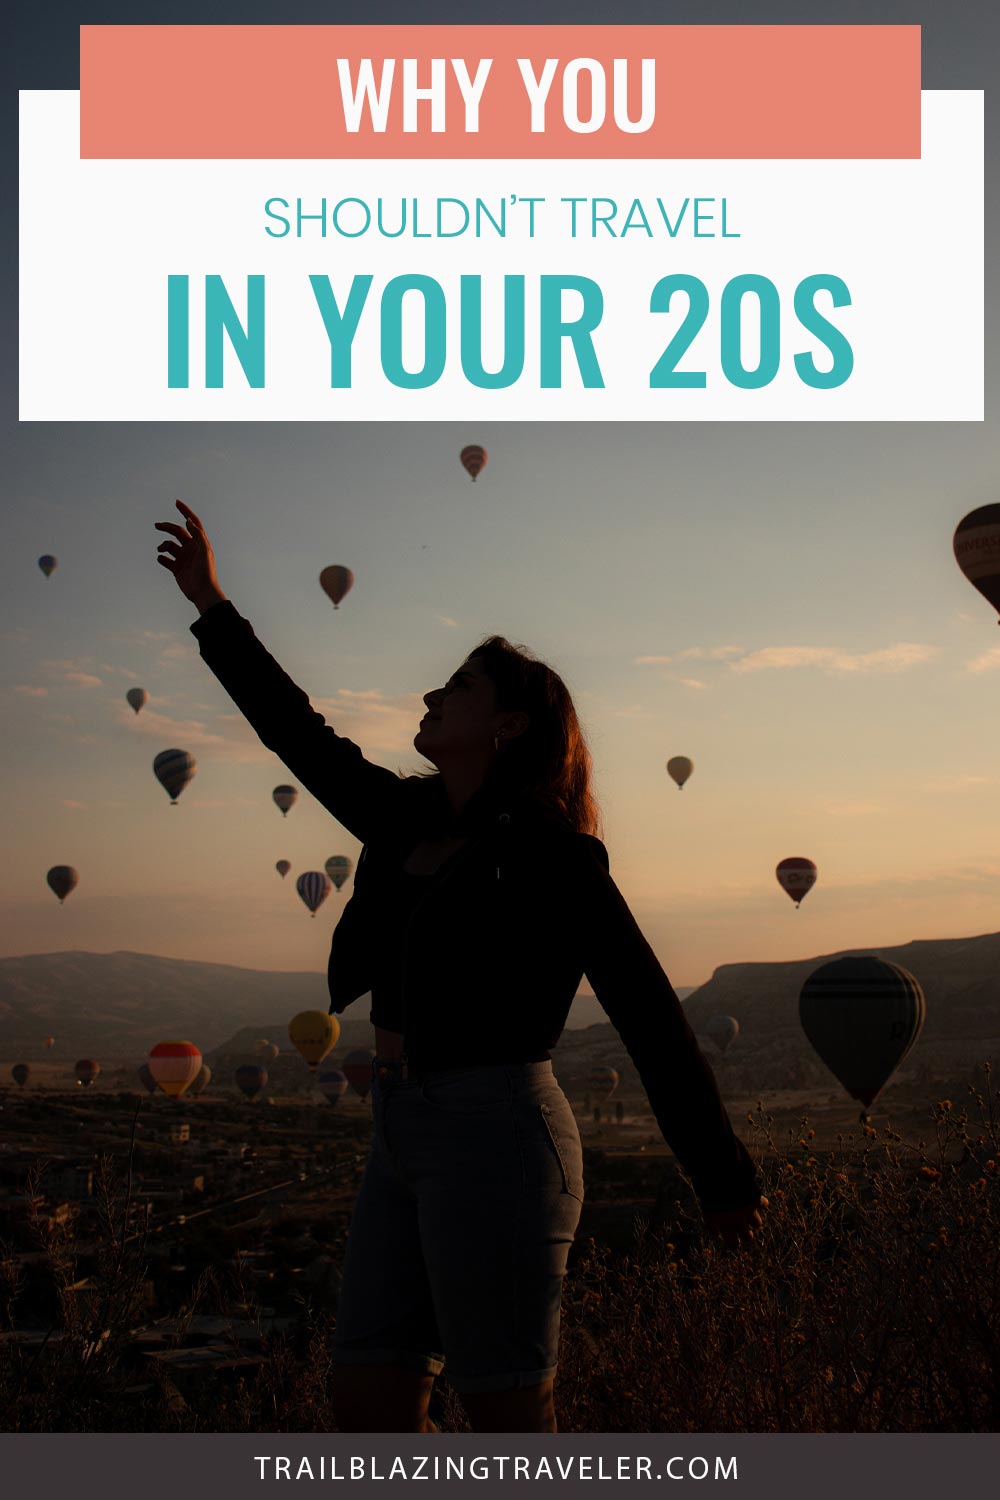 Girl extending her right hand upwards while hot air balloons are on the sky far away - Why You Shouldn’t Travel In Your 20s?